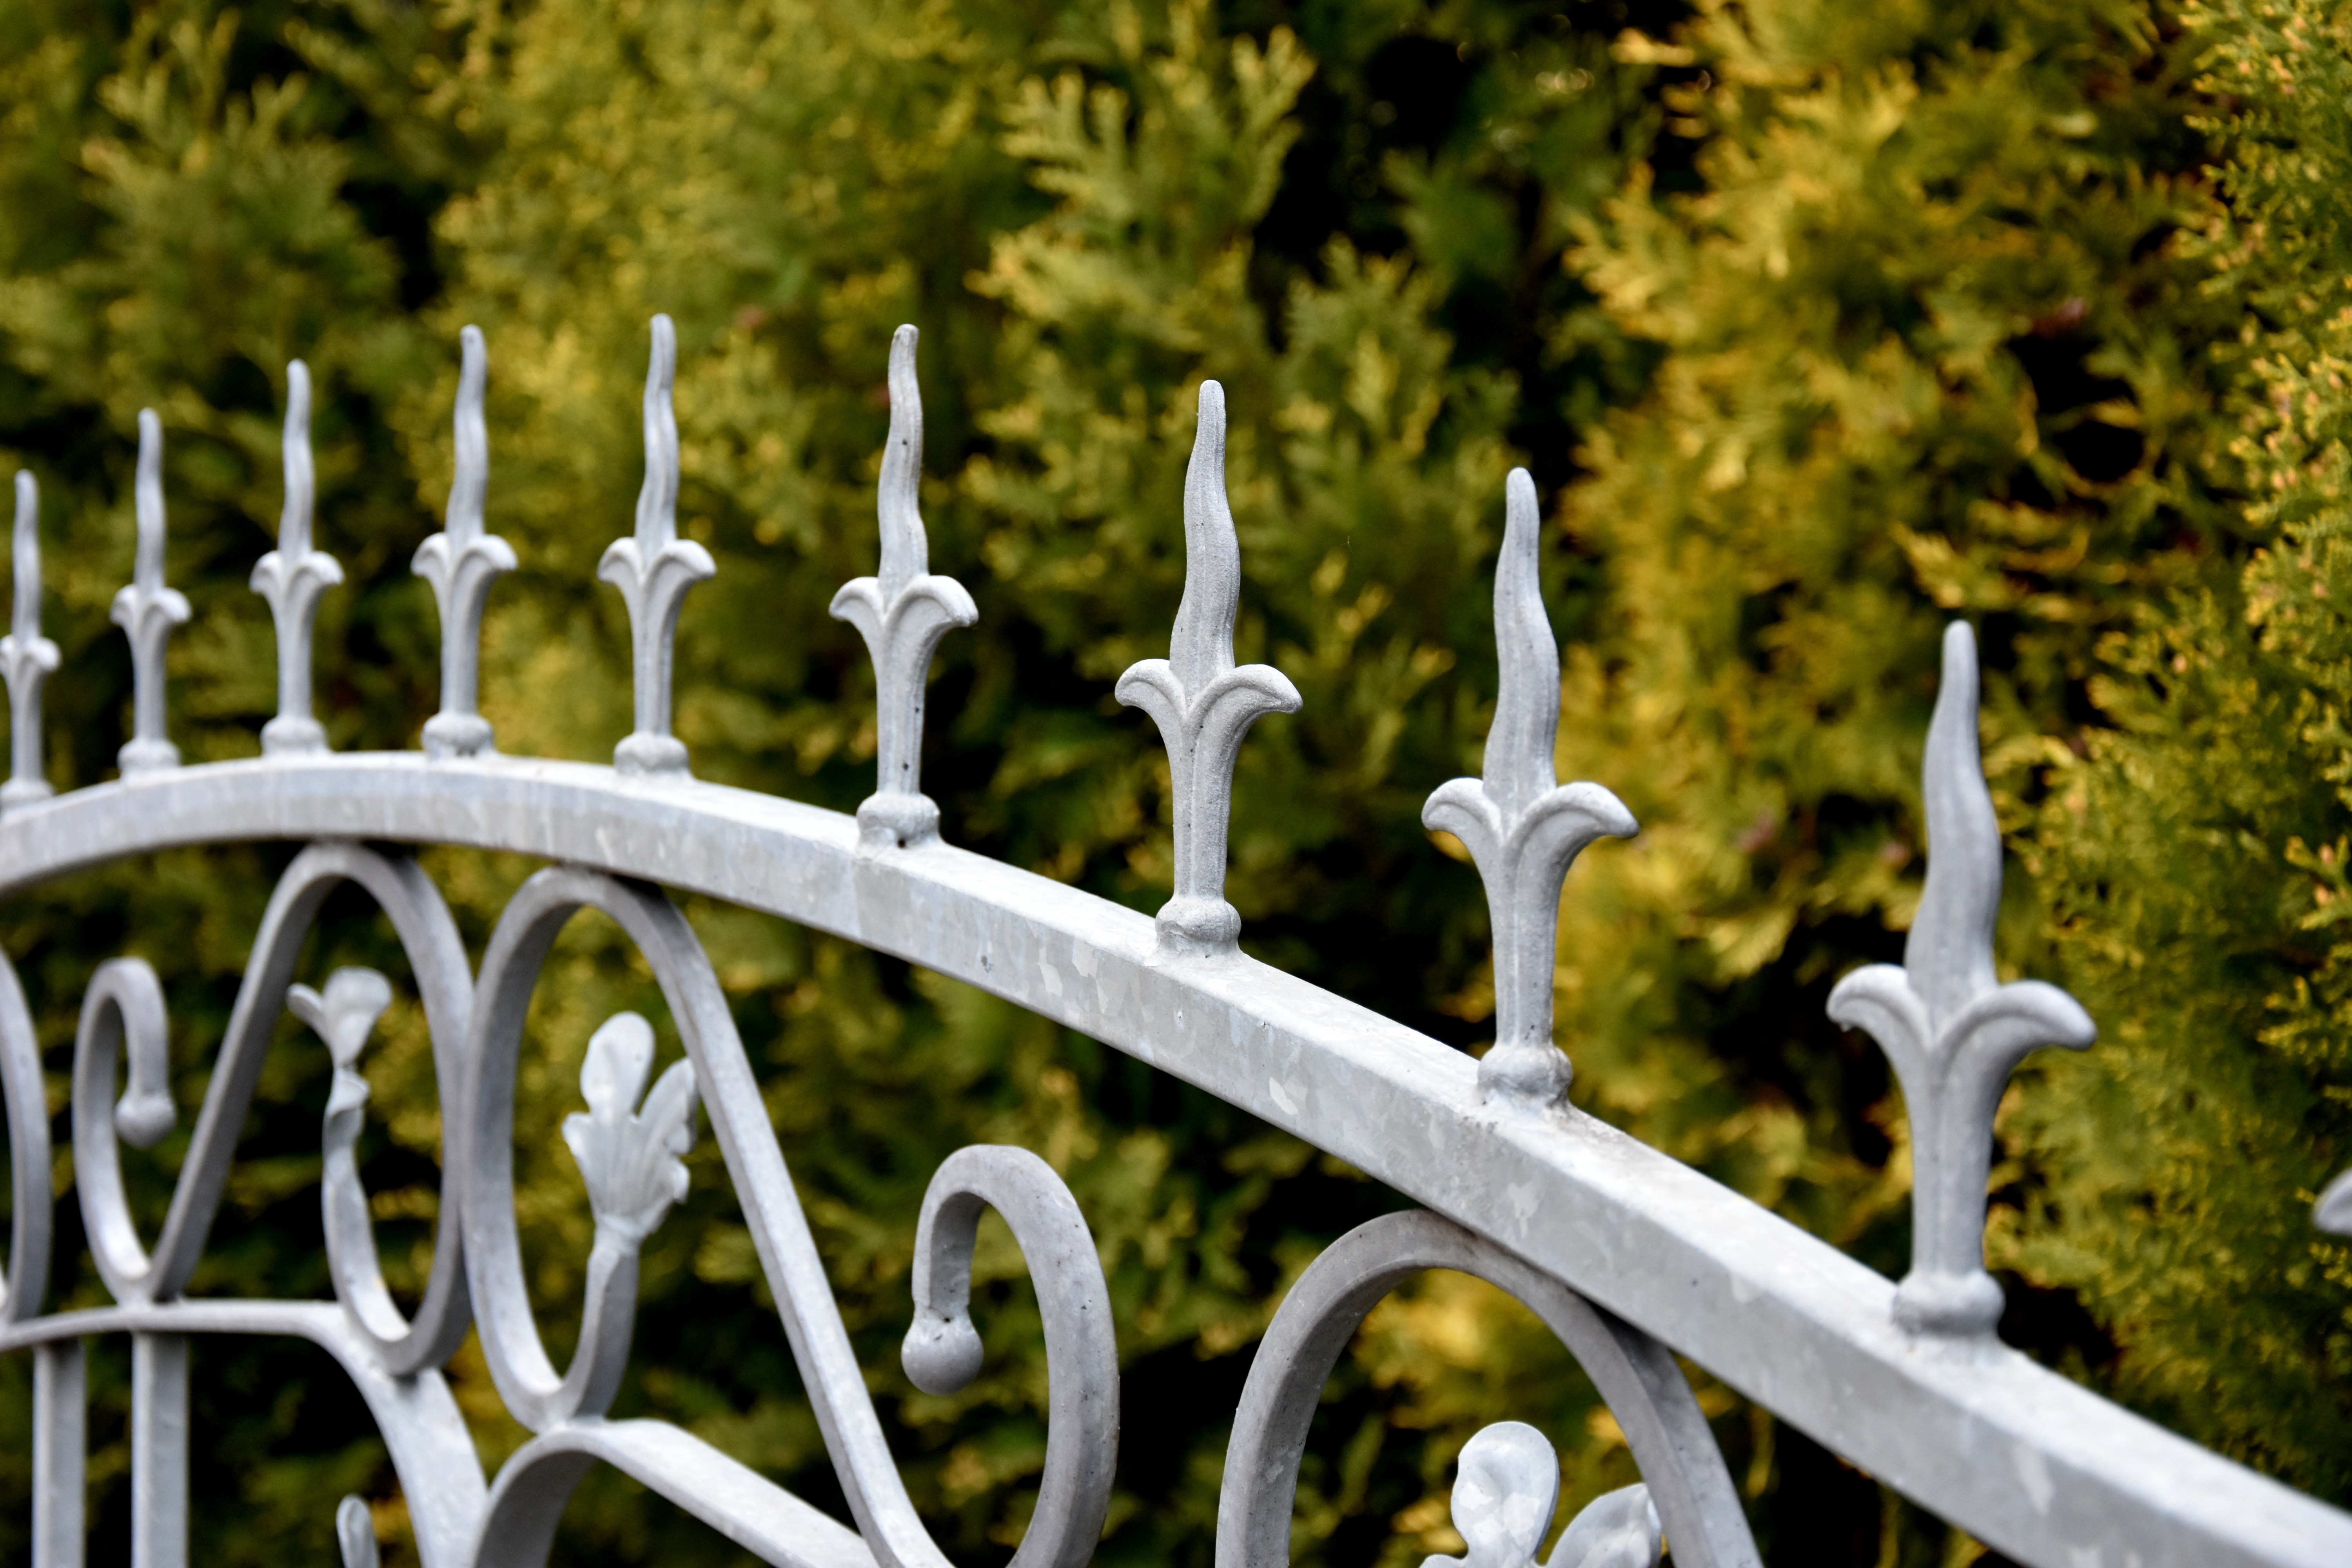 gray metal spiked frame security fence